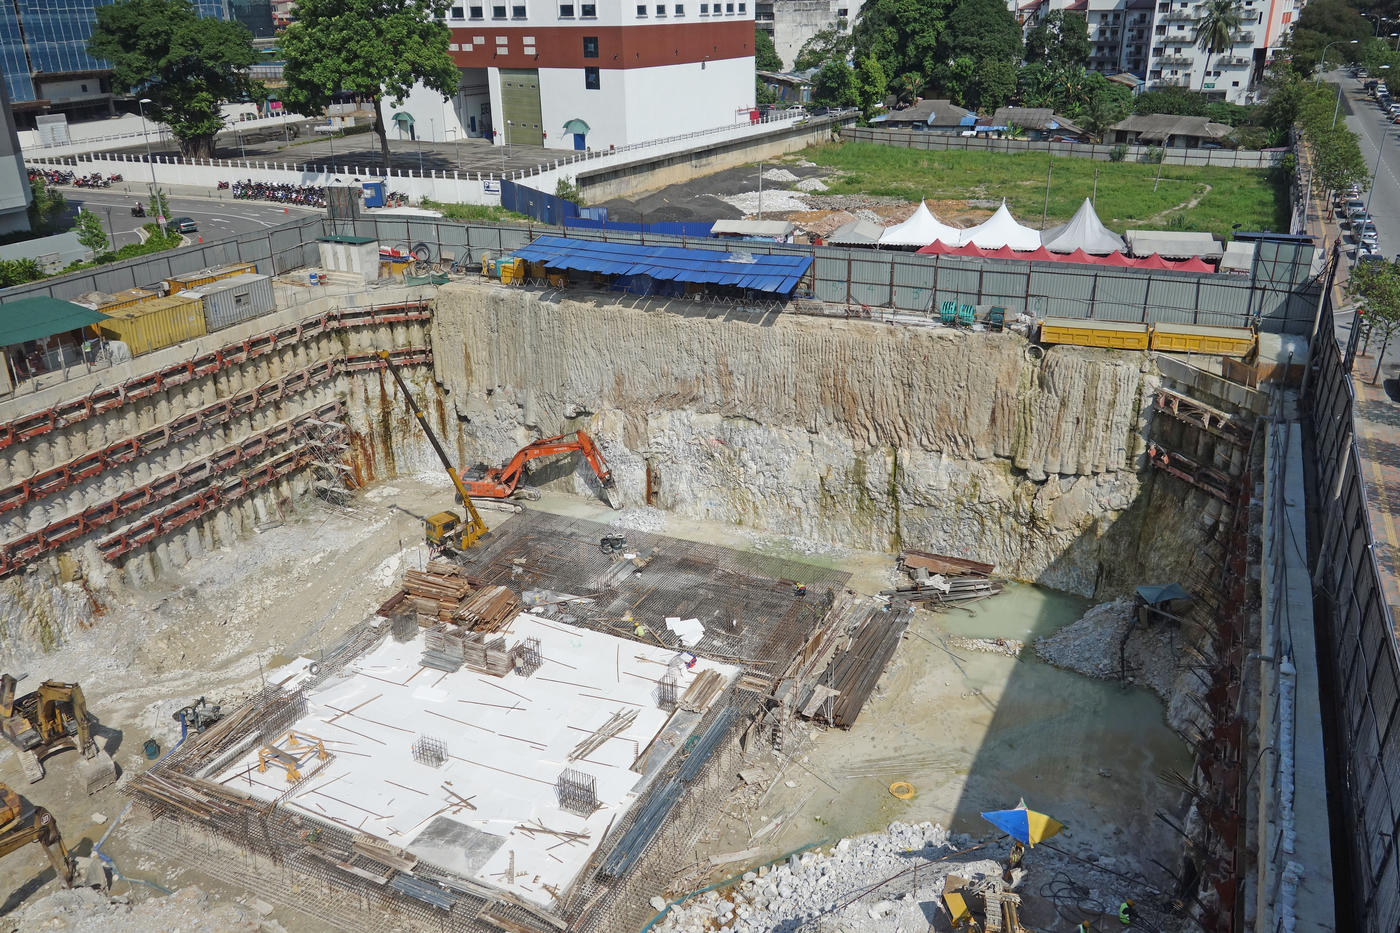 Basement excavation support in downtown Kuala Lumpur using soil mixing